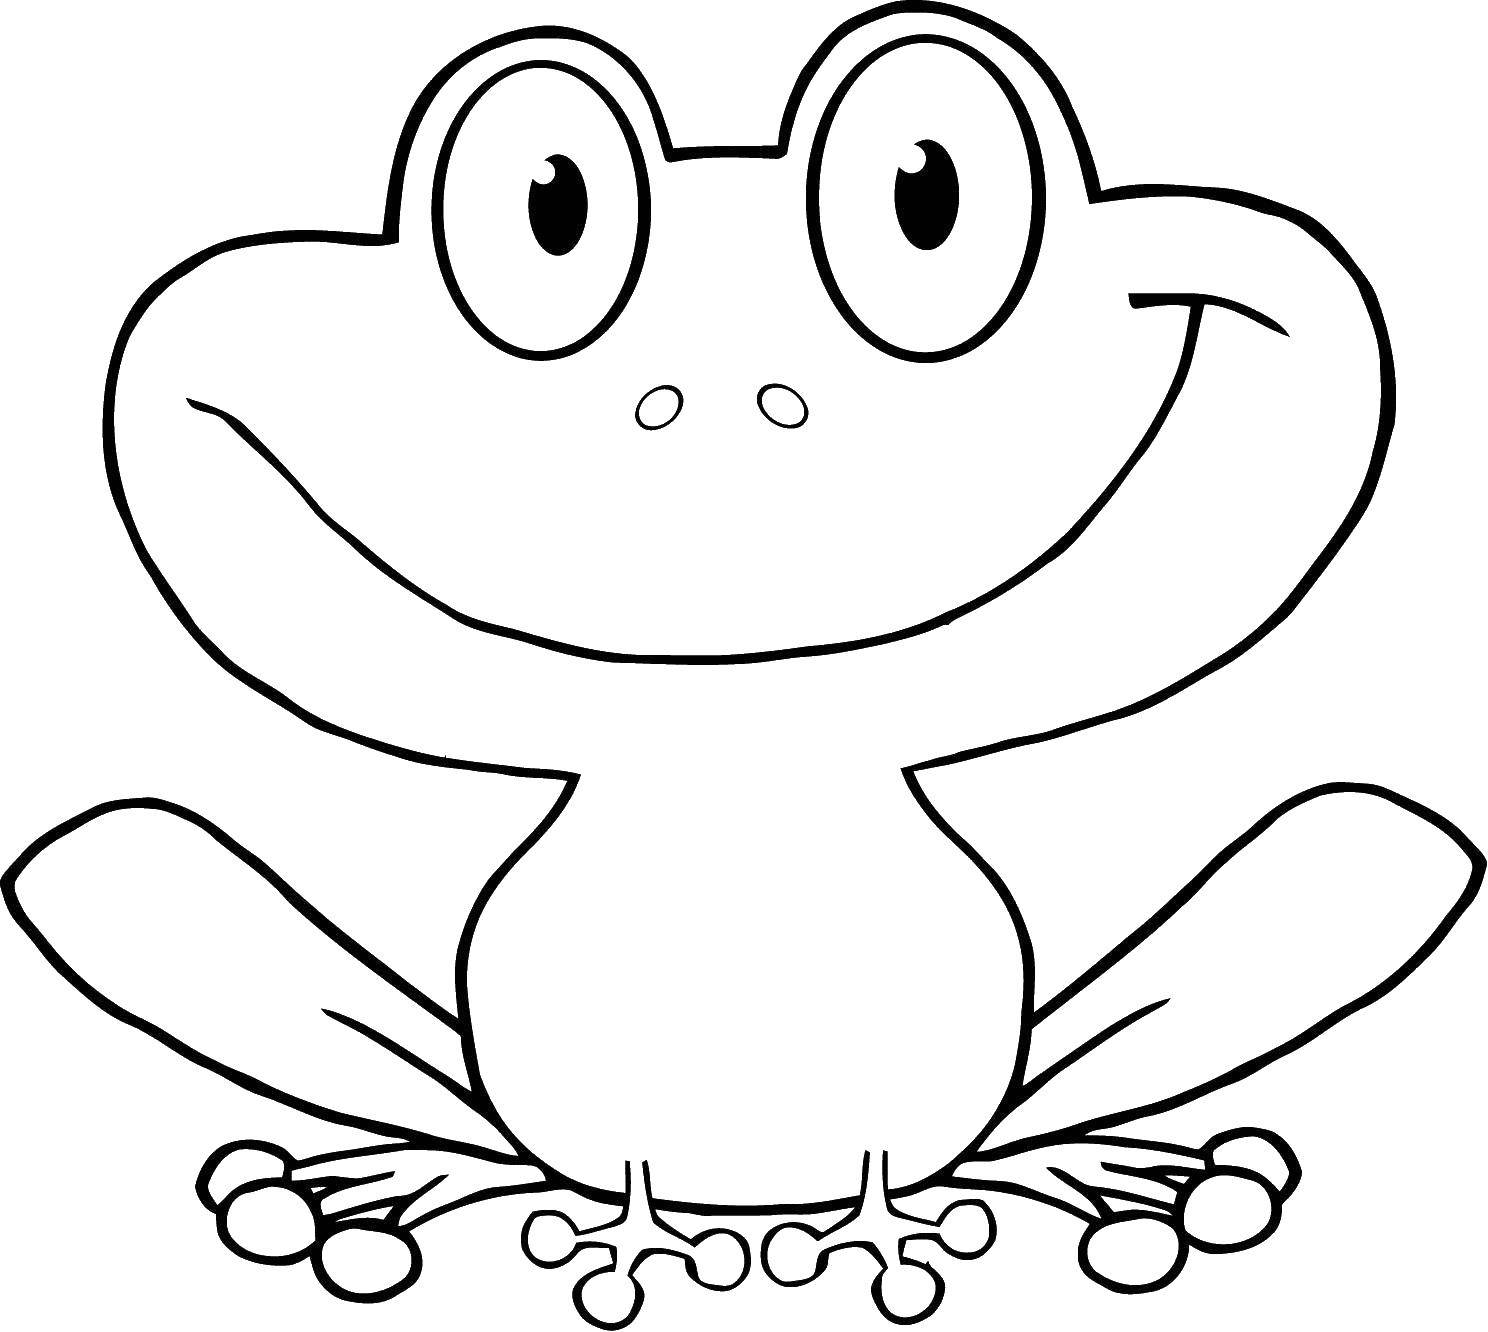 Coloring Frog. Category the frog. Tags:  the frog.